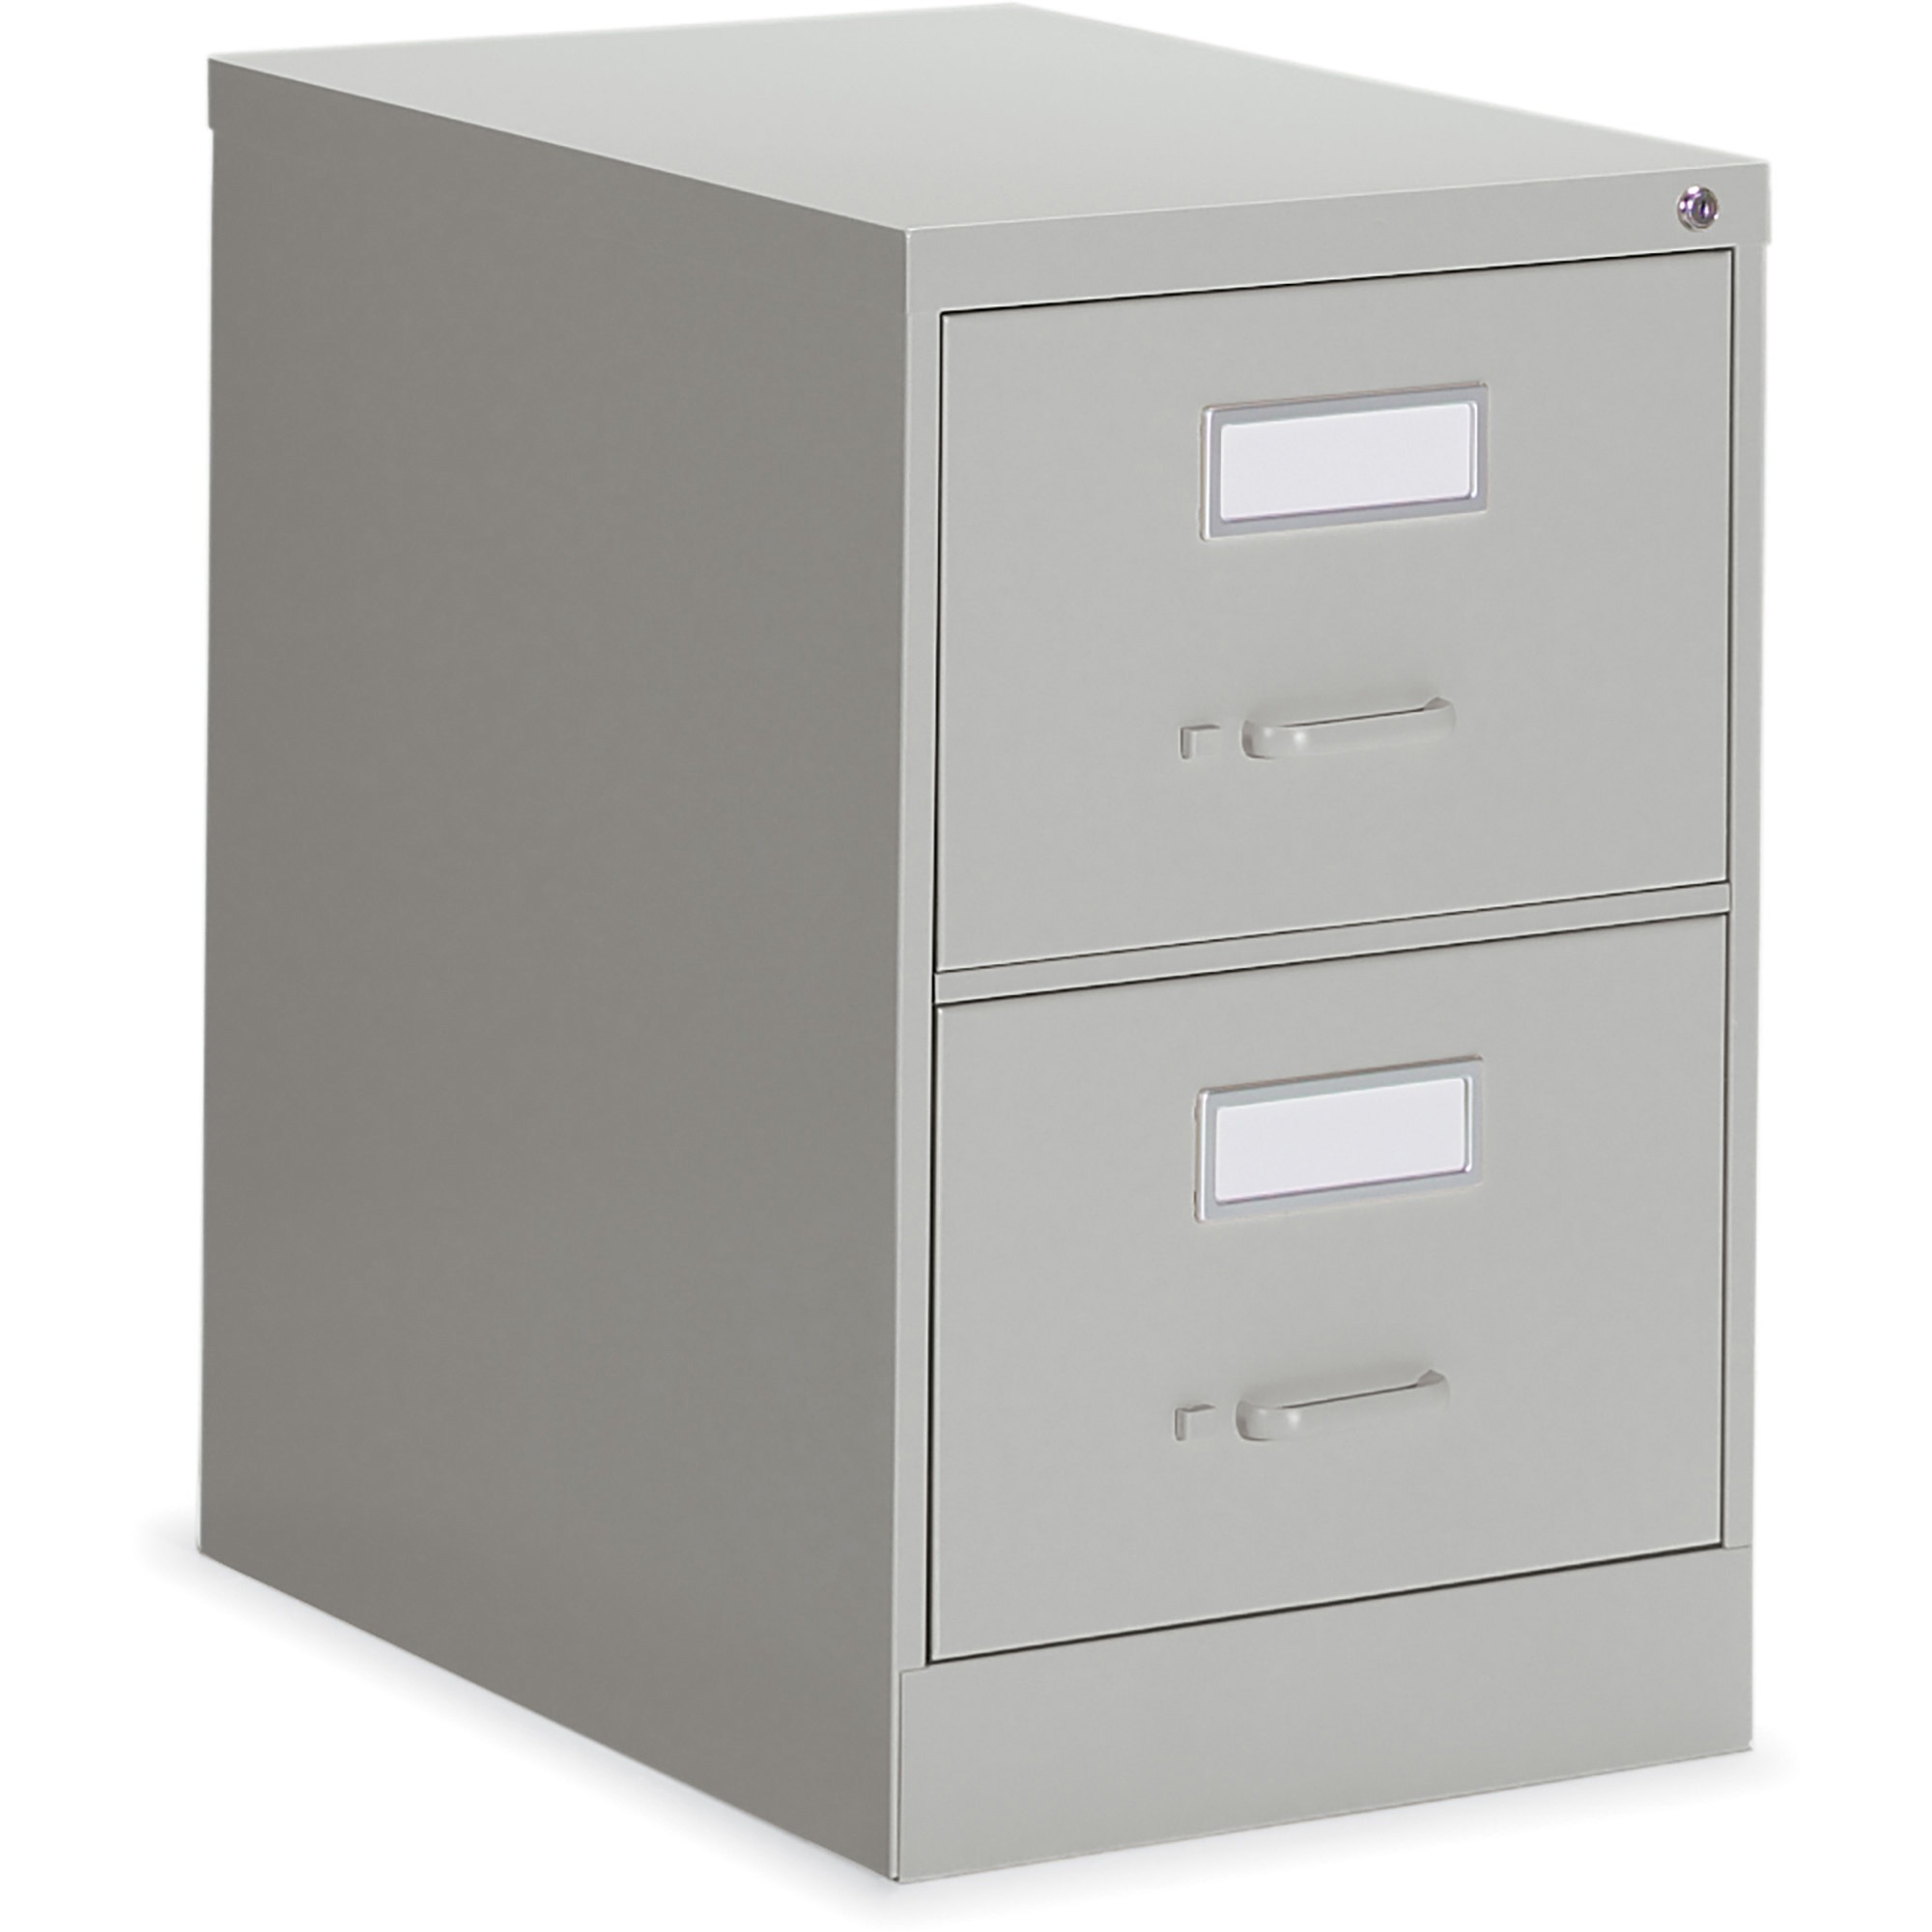 Global 2600 Vertical File Cabinet 18 X 26 6 X 29 2 X Drawer